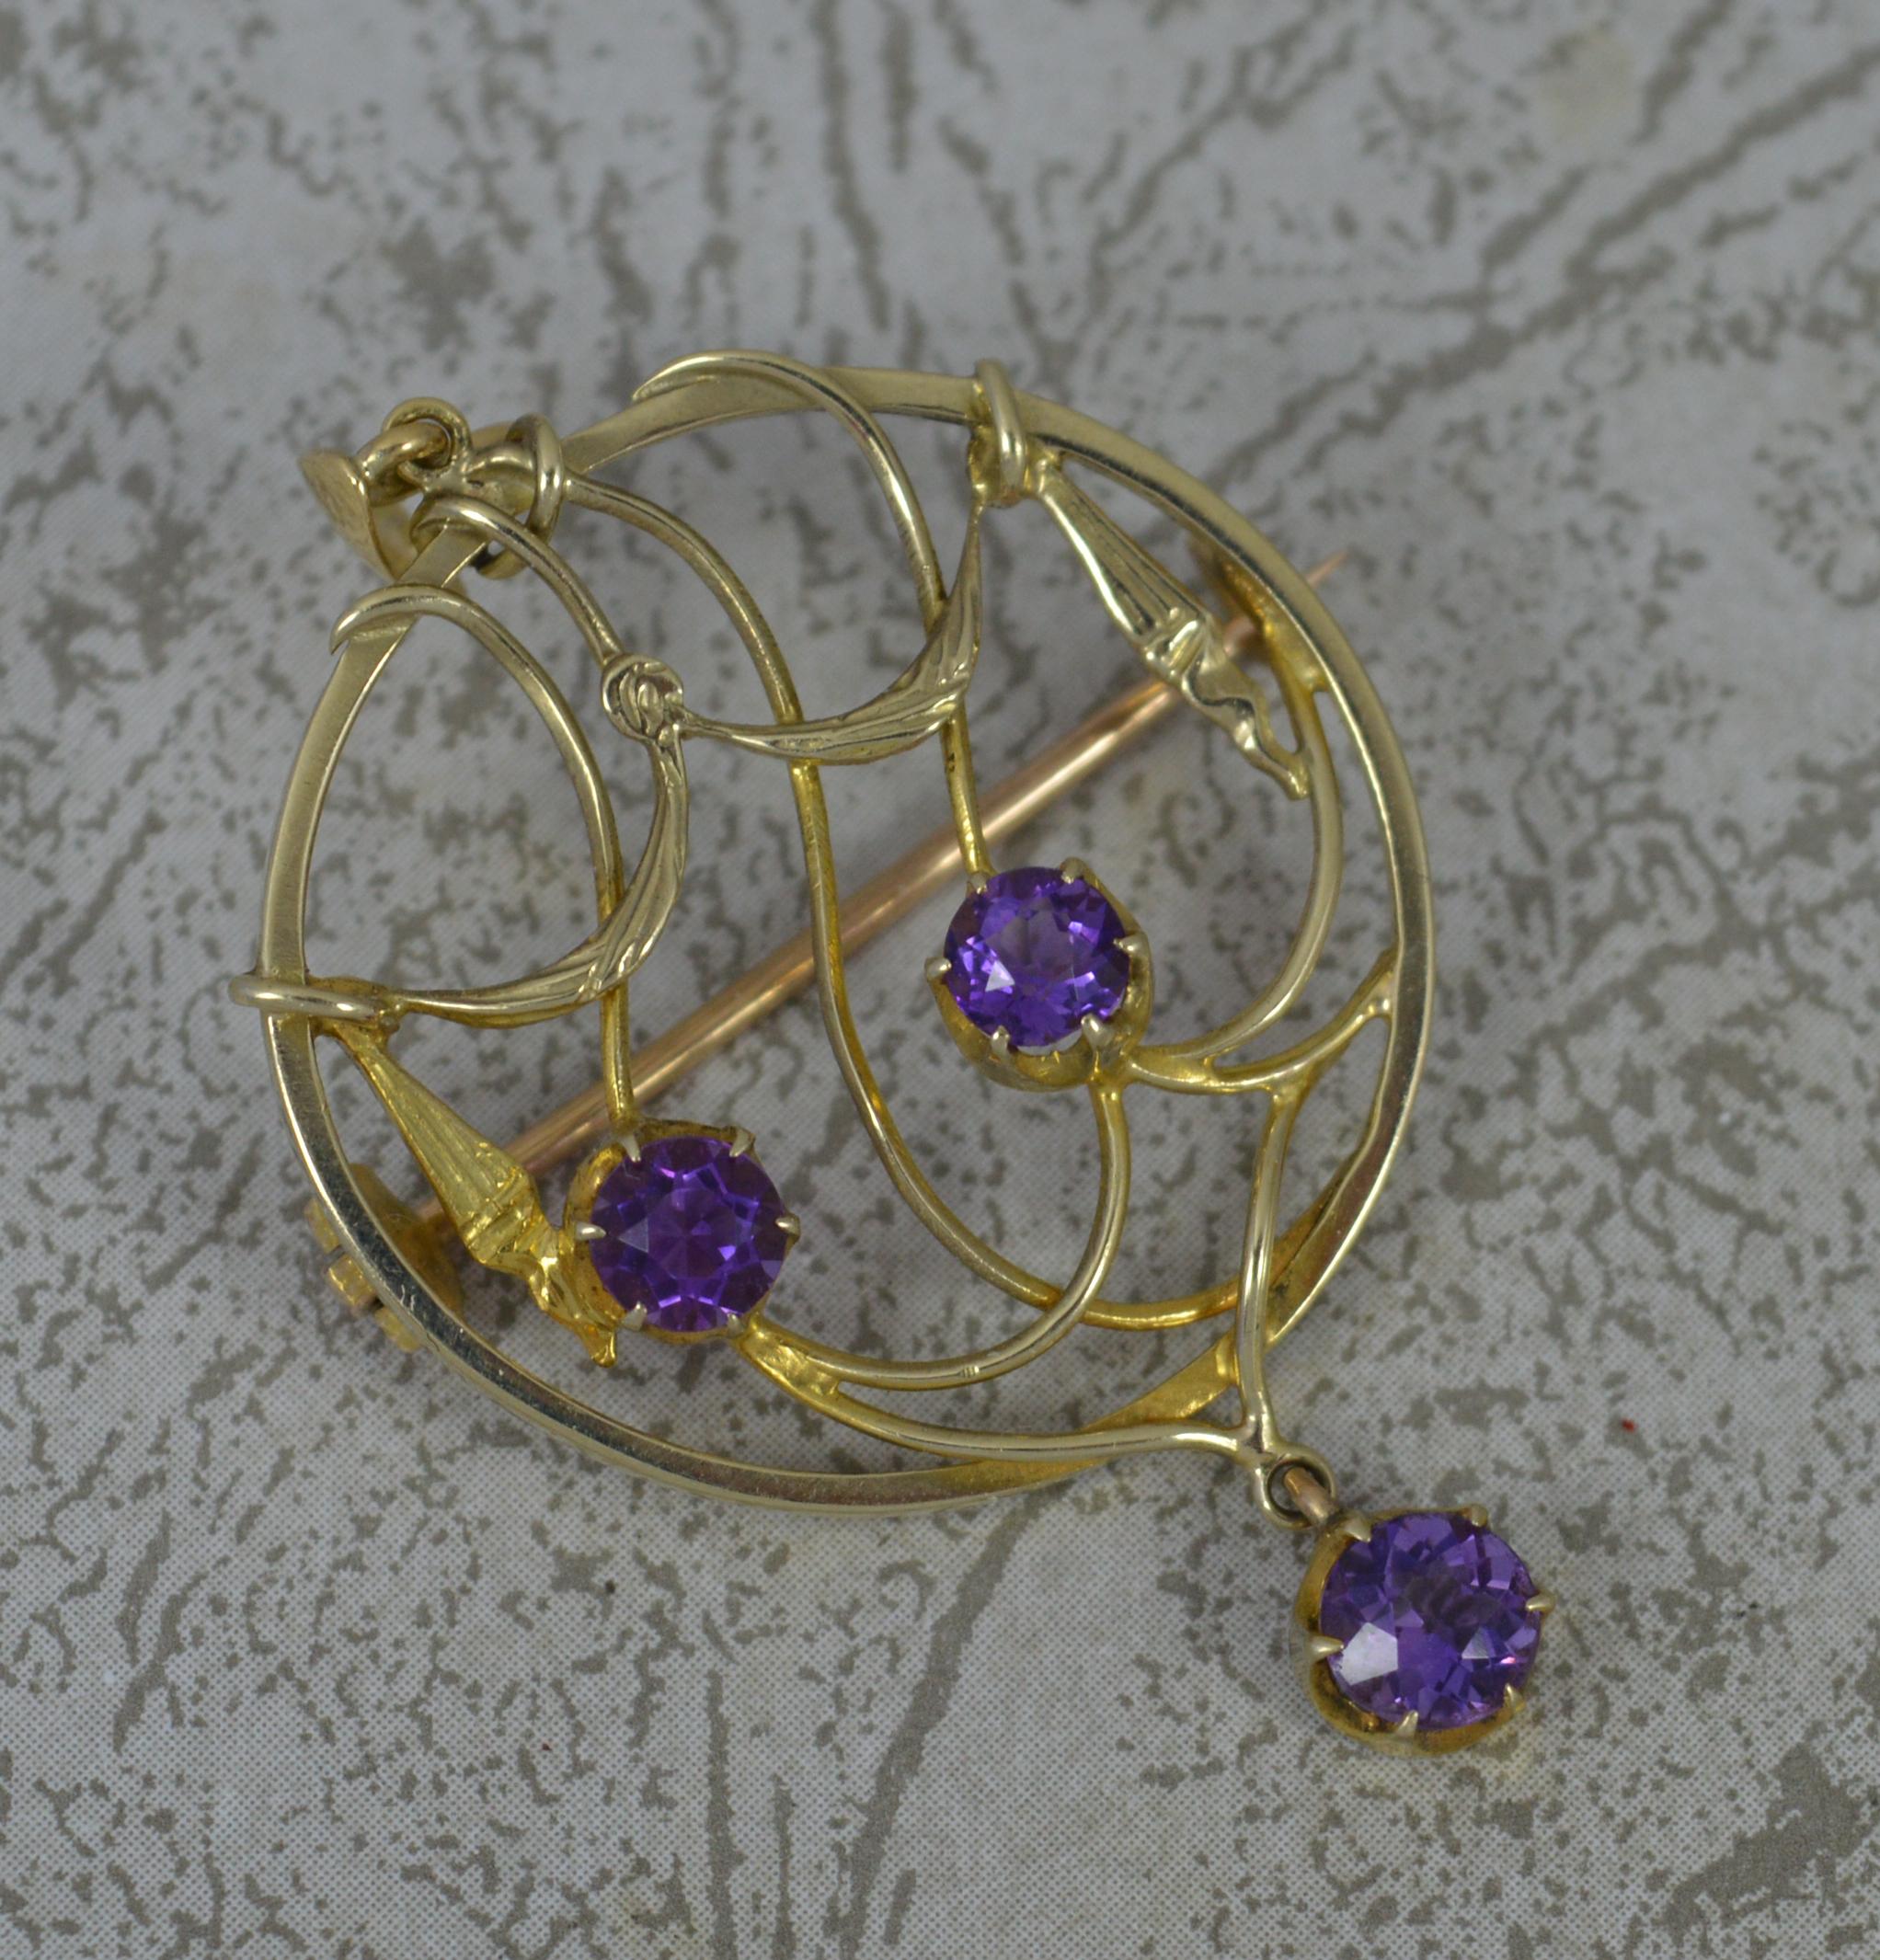 A very stylish Edwardian period pendant.
Designed with a draped pierced circular shape to centre set two amethyst stones and a final amethyst drop to base.
Solid 15 carat yellow gold example.

CONDITION ; Excellent. Crisp design. Well set stones.